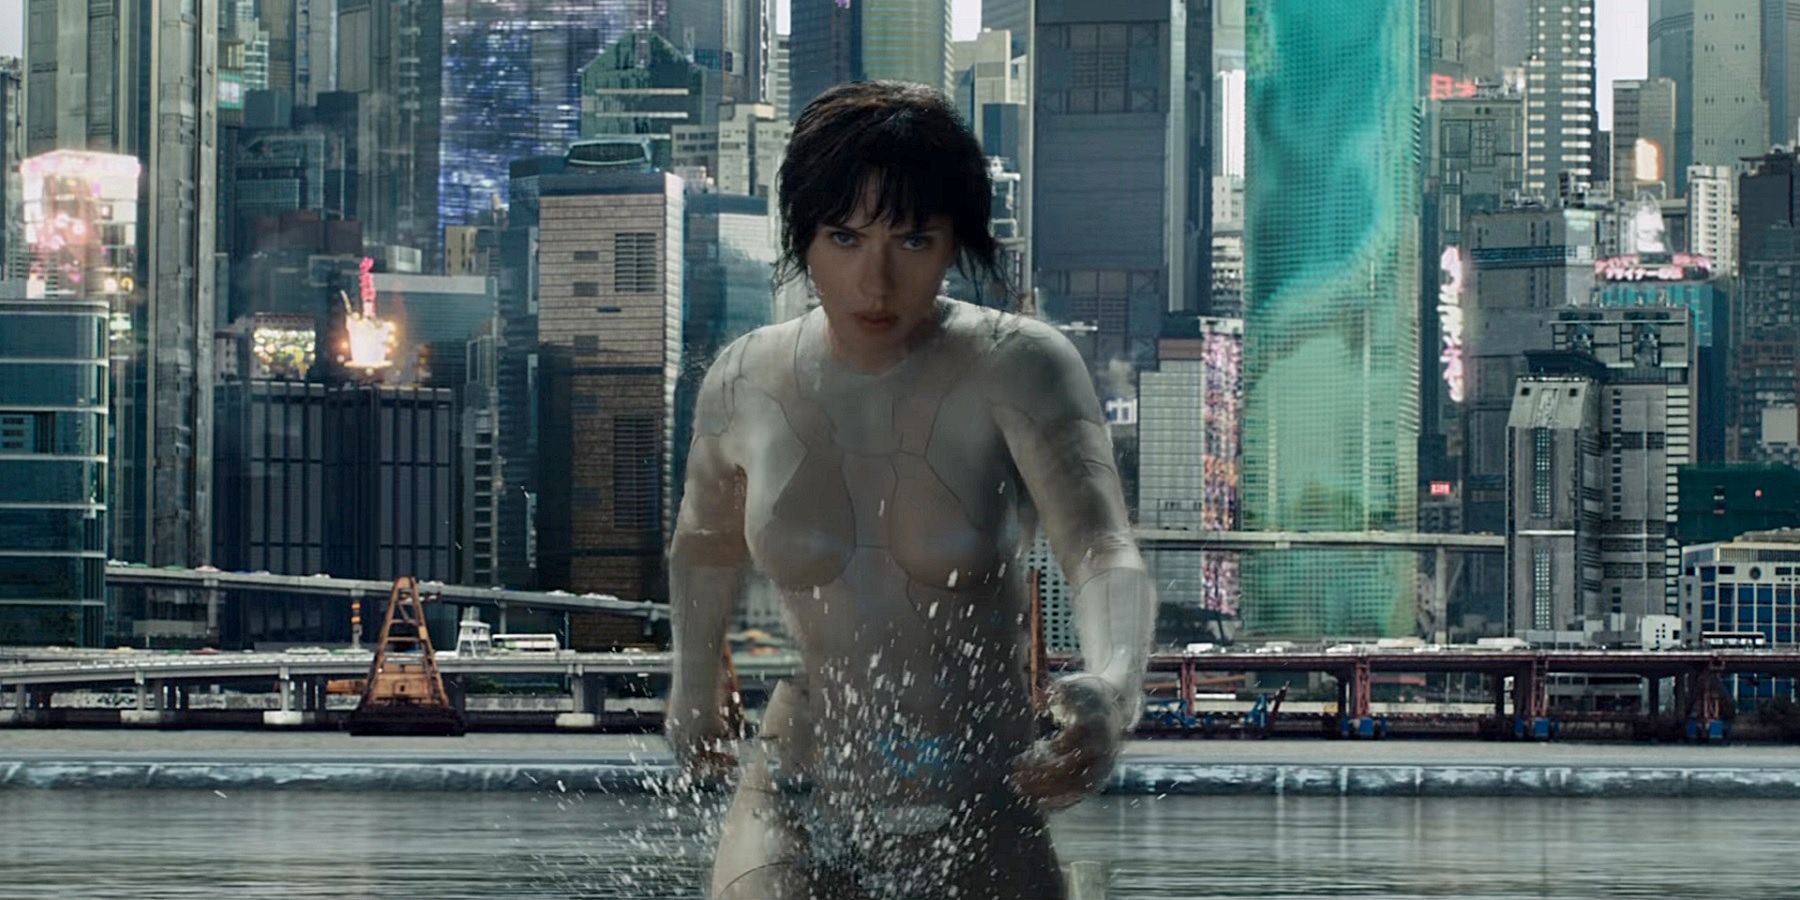 Ghost in the Shell Trailer - Major cloaking